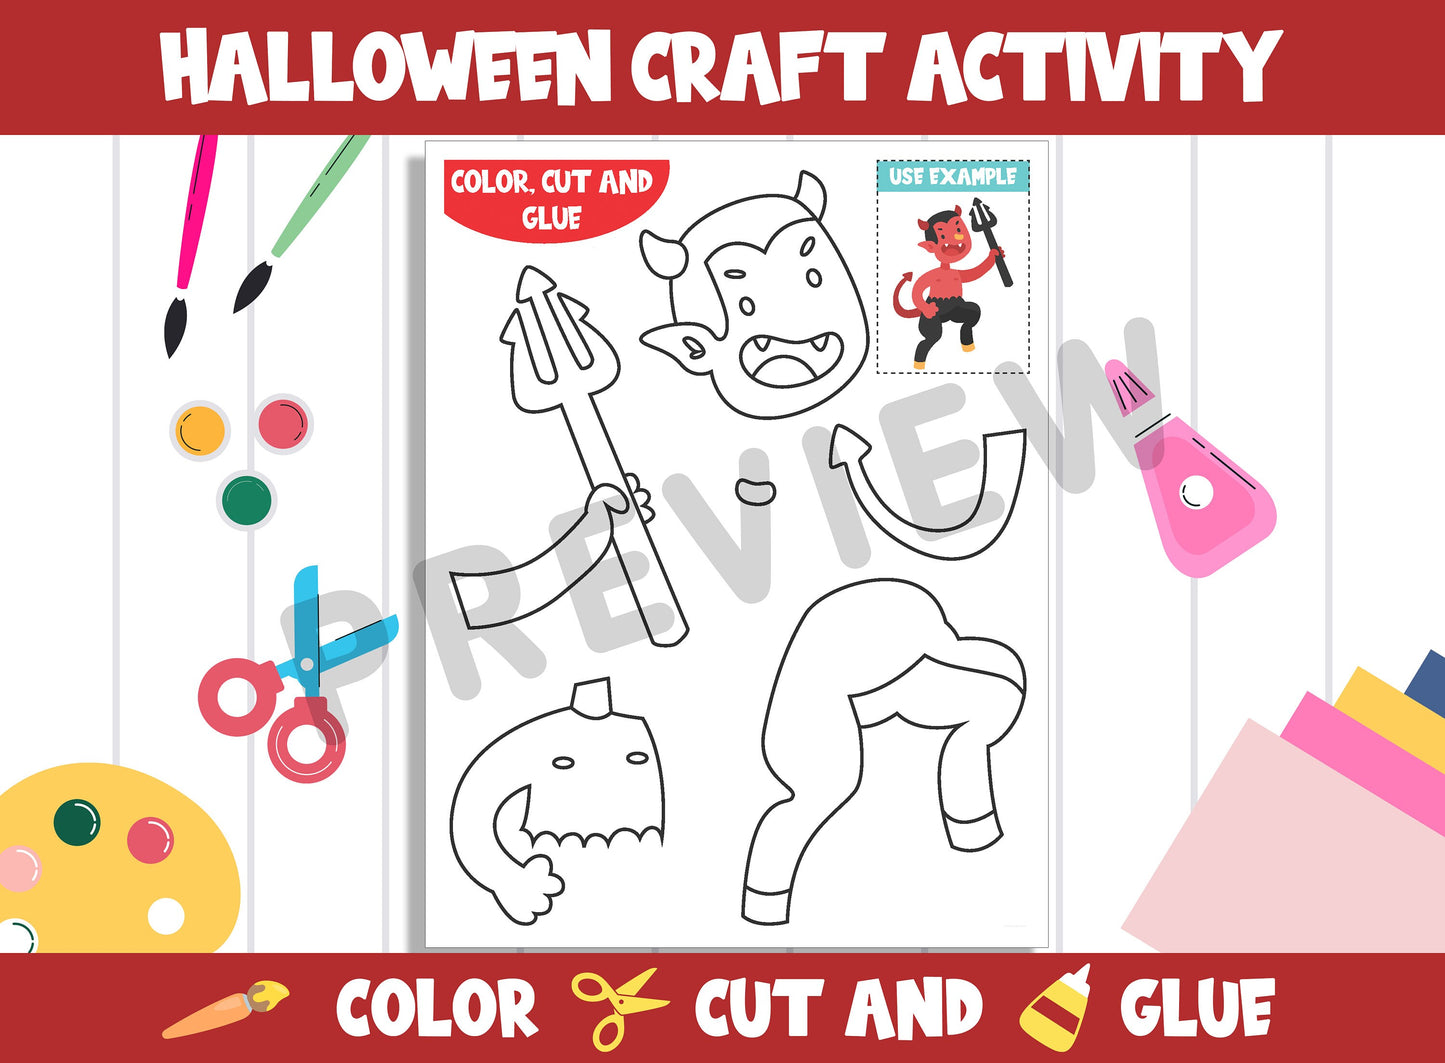 Halloween Character Craft Activity - Devil - Color, Cut, and Glue for PreK to 2nd Grade, PDF File, Instant Download